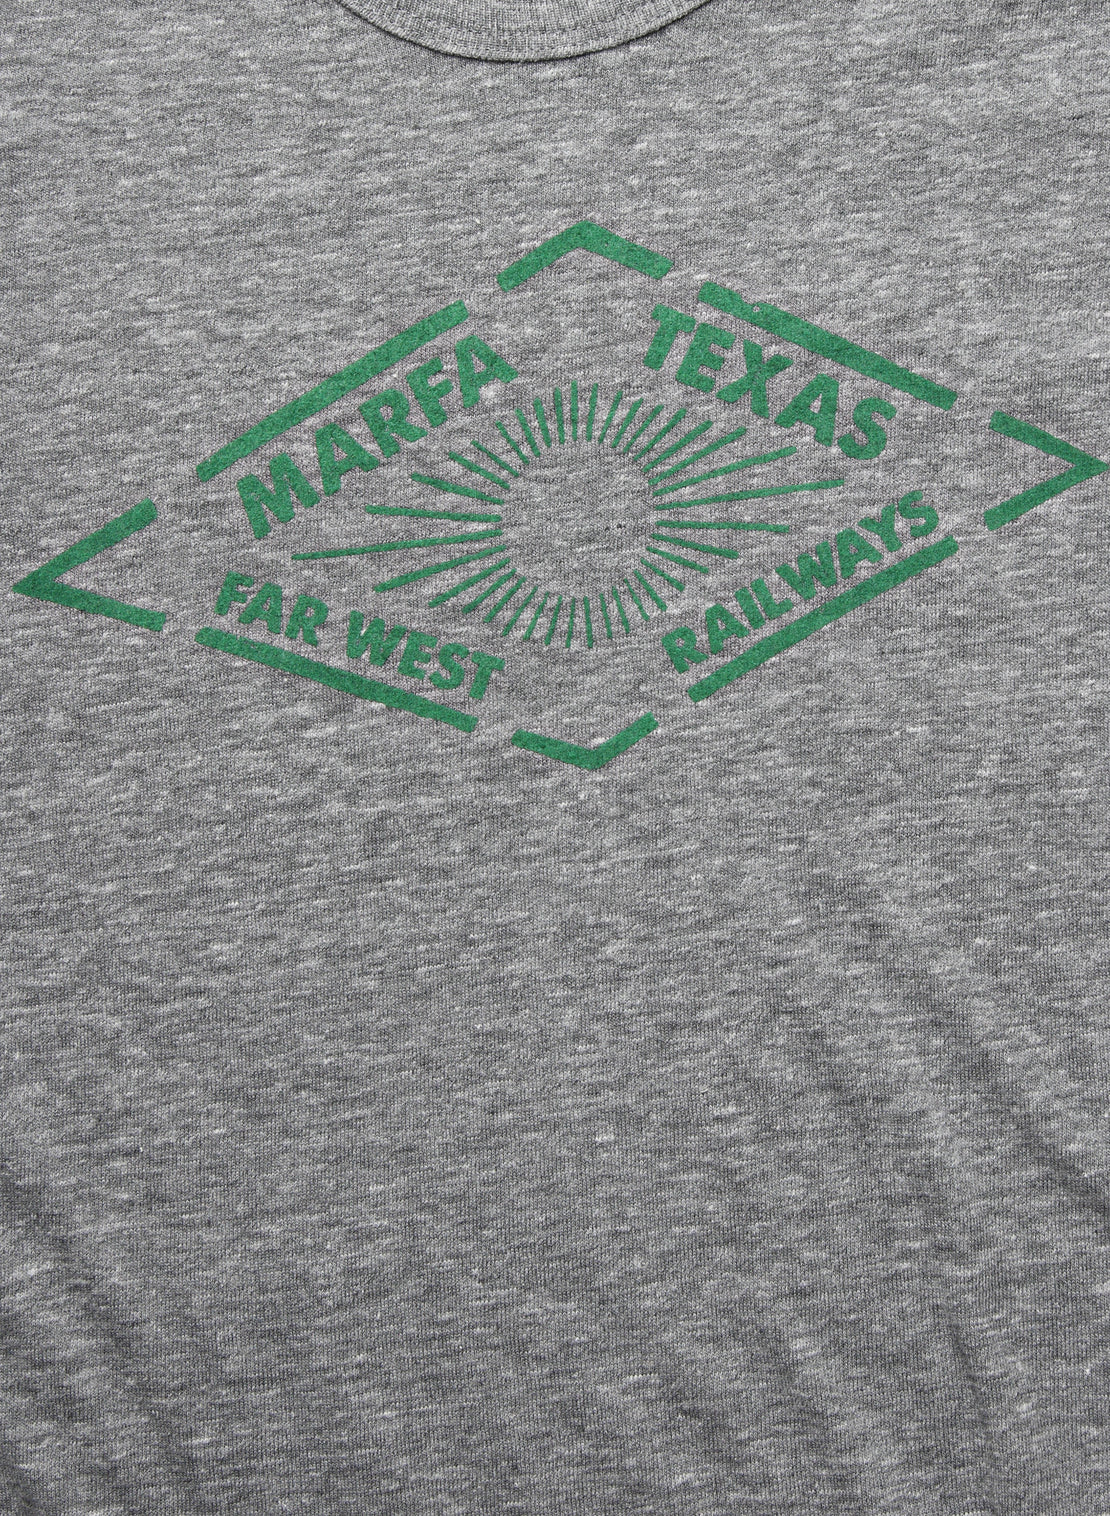 Graphic Tee - Marfa Rail - Alchemy Design - STAG Provisions - Tops - S/S Tee - Graphic